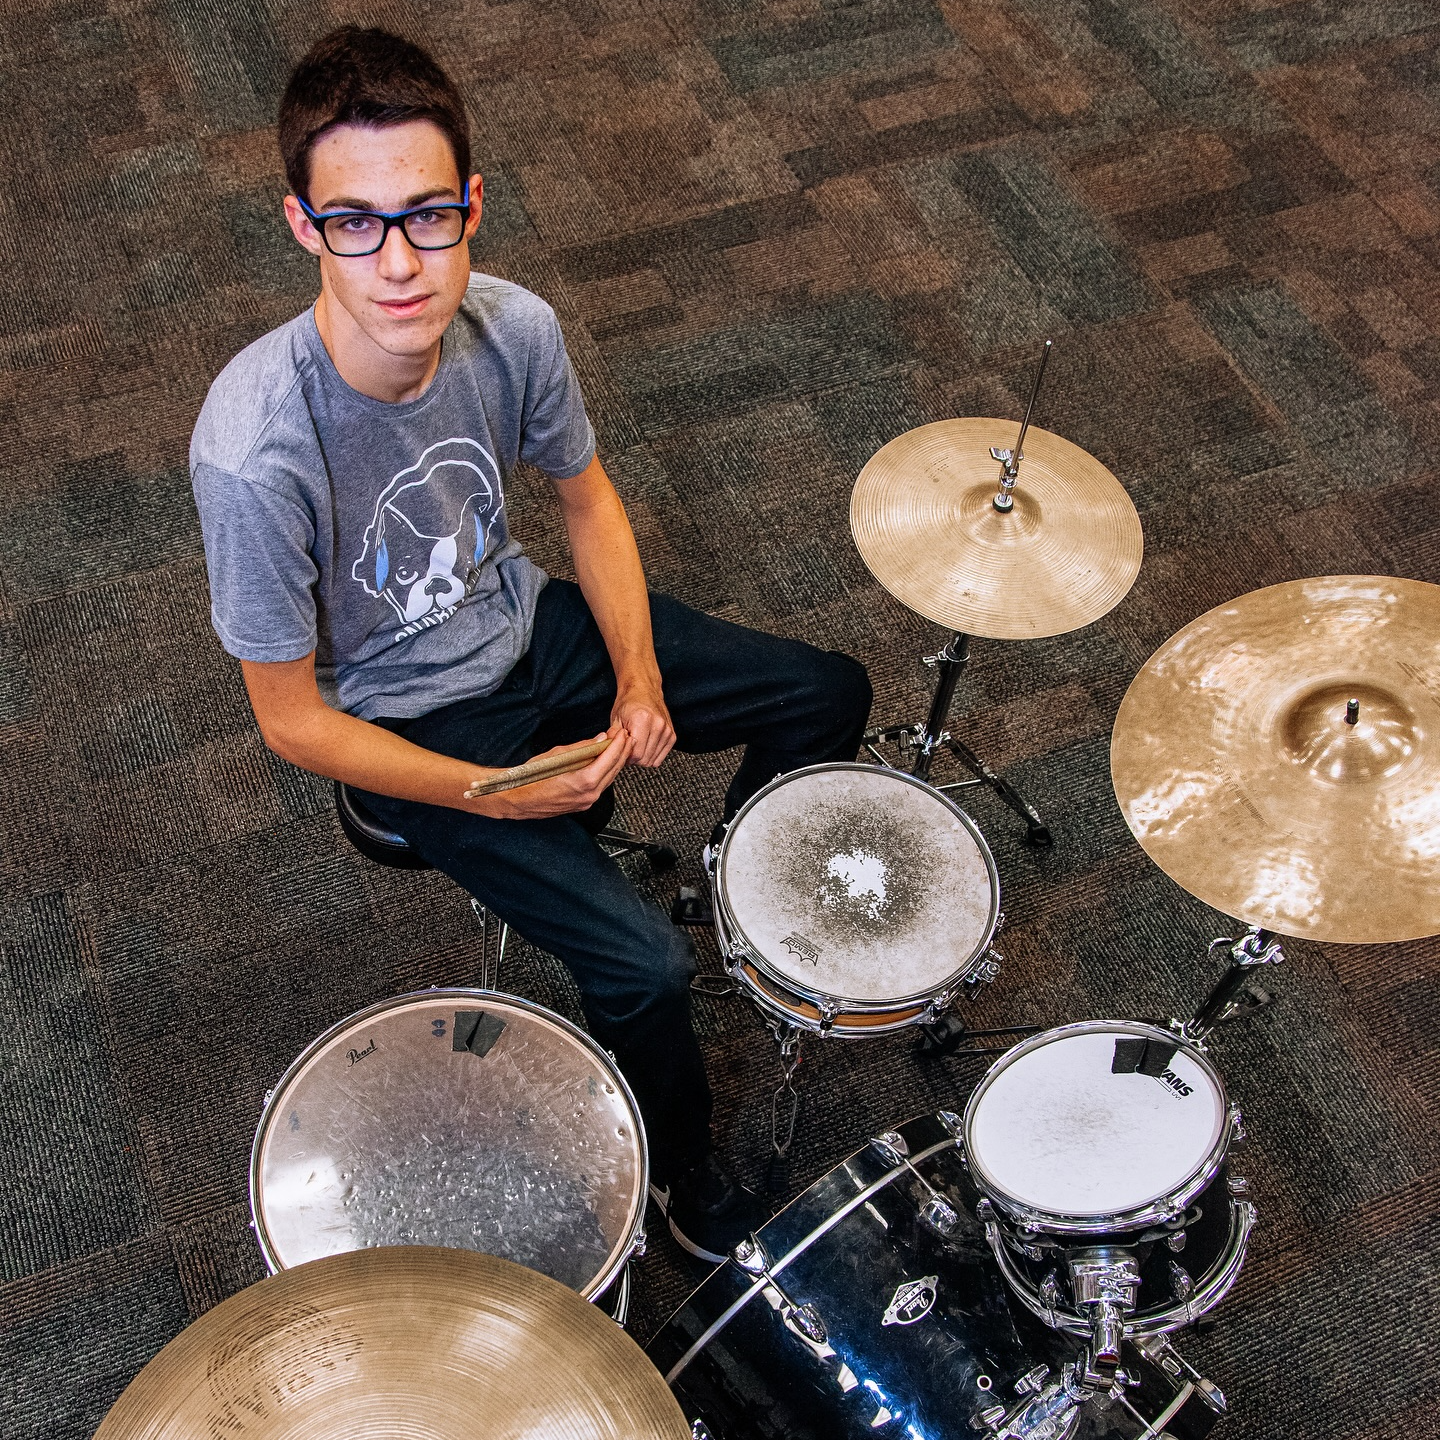 Student sitting by drums